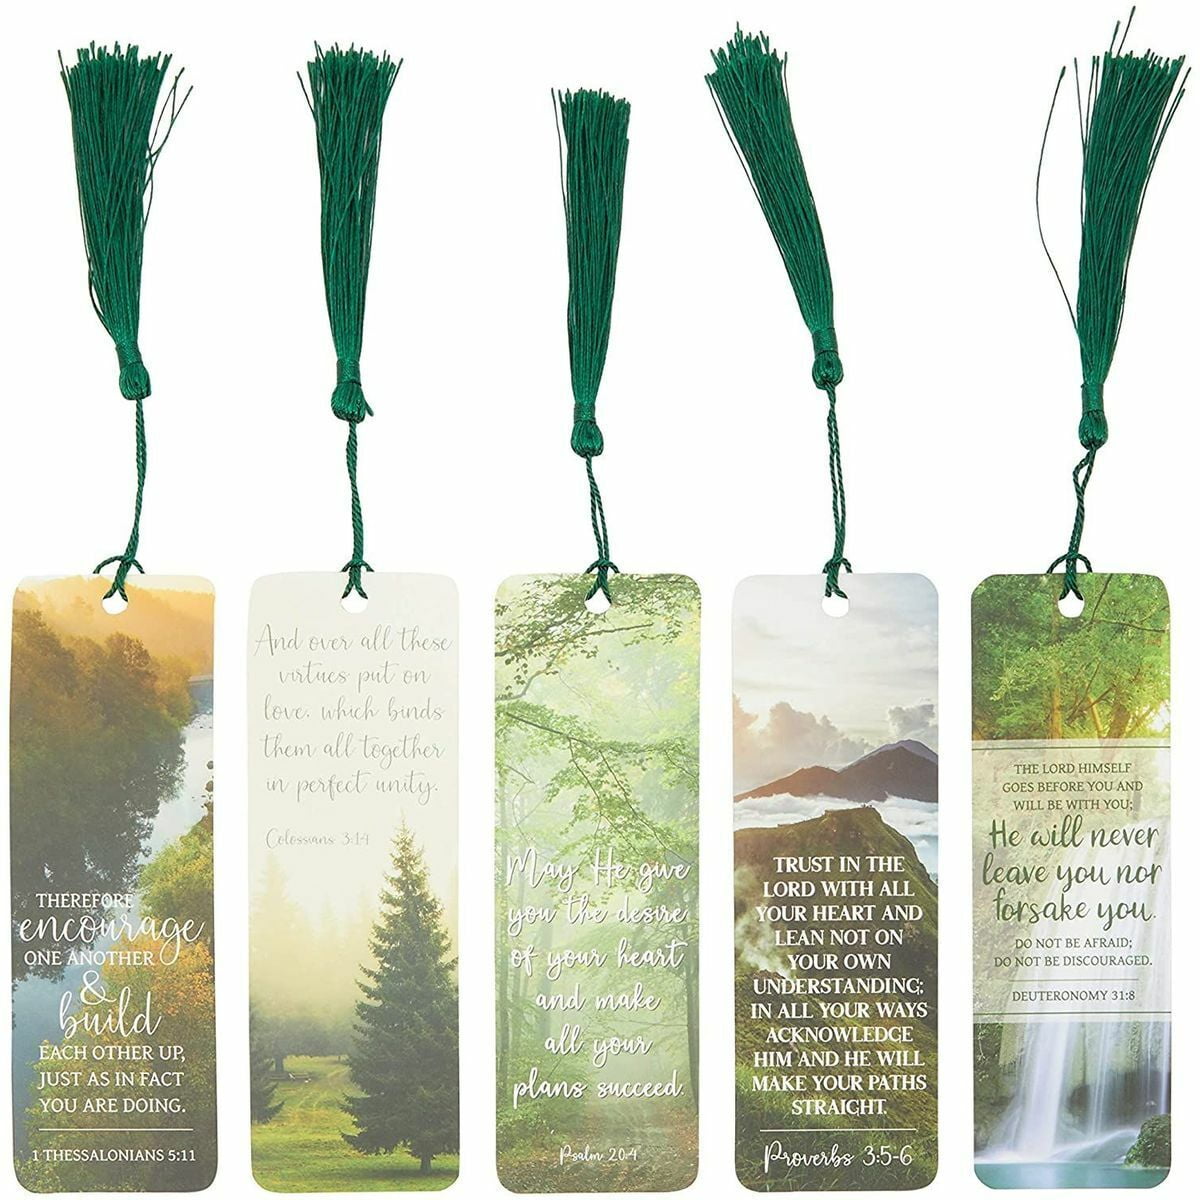 Set of 5 Motivational Quotes Wooden Bookmarks with Colored Tassels